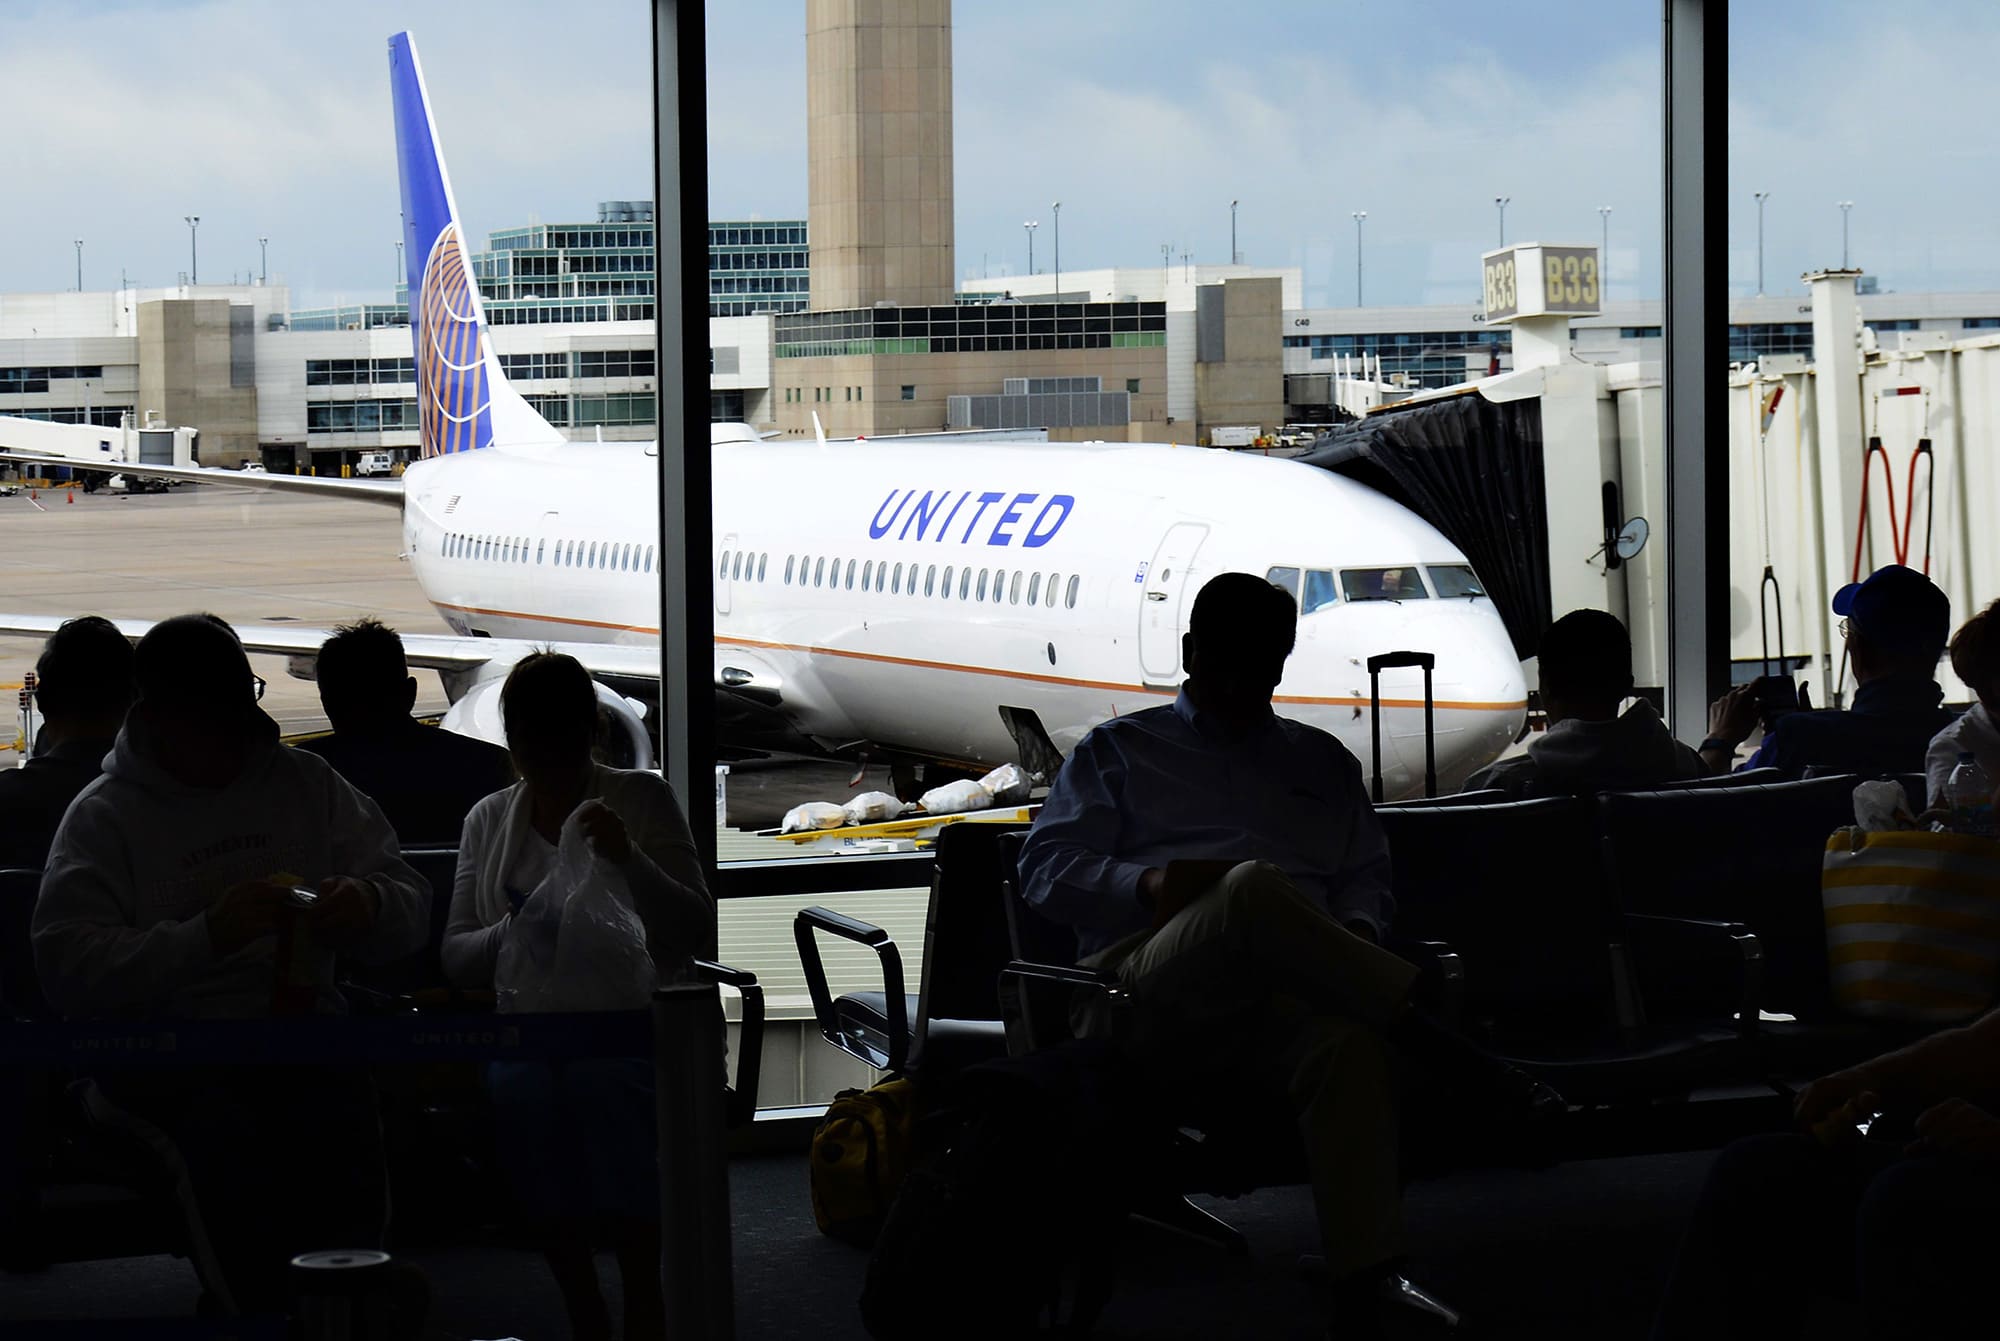 United Airlines begins bus service directly to Colorado ski slopes from Denver